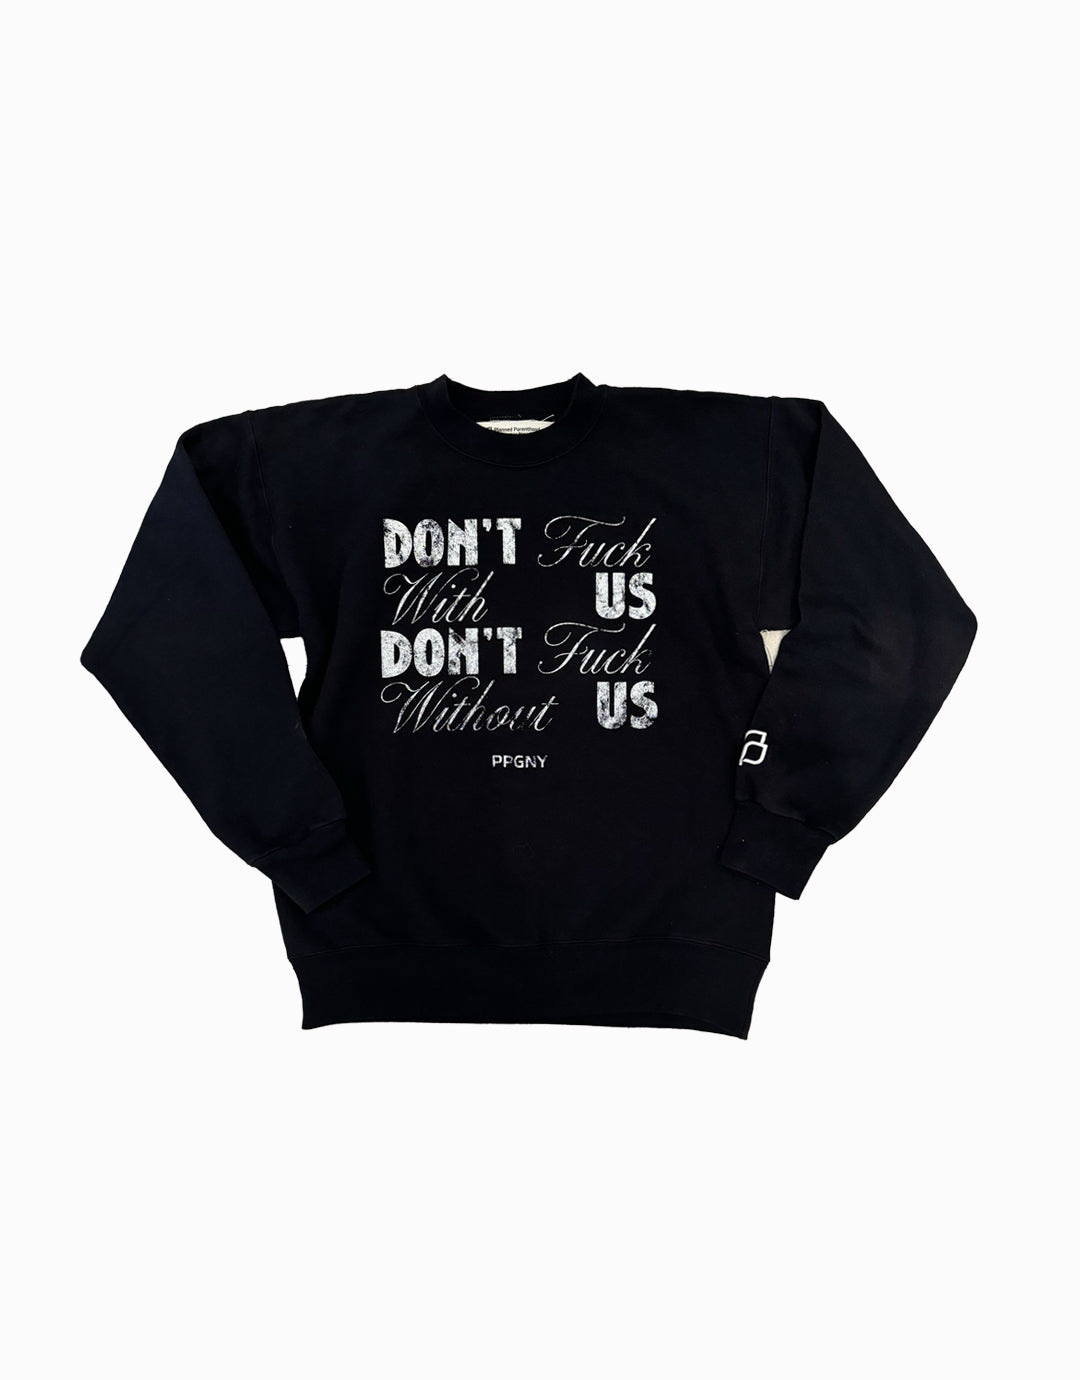 Don’t F*ck With Us, Don’t F*ck Without Us Sweatshirt